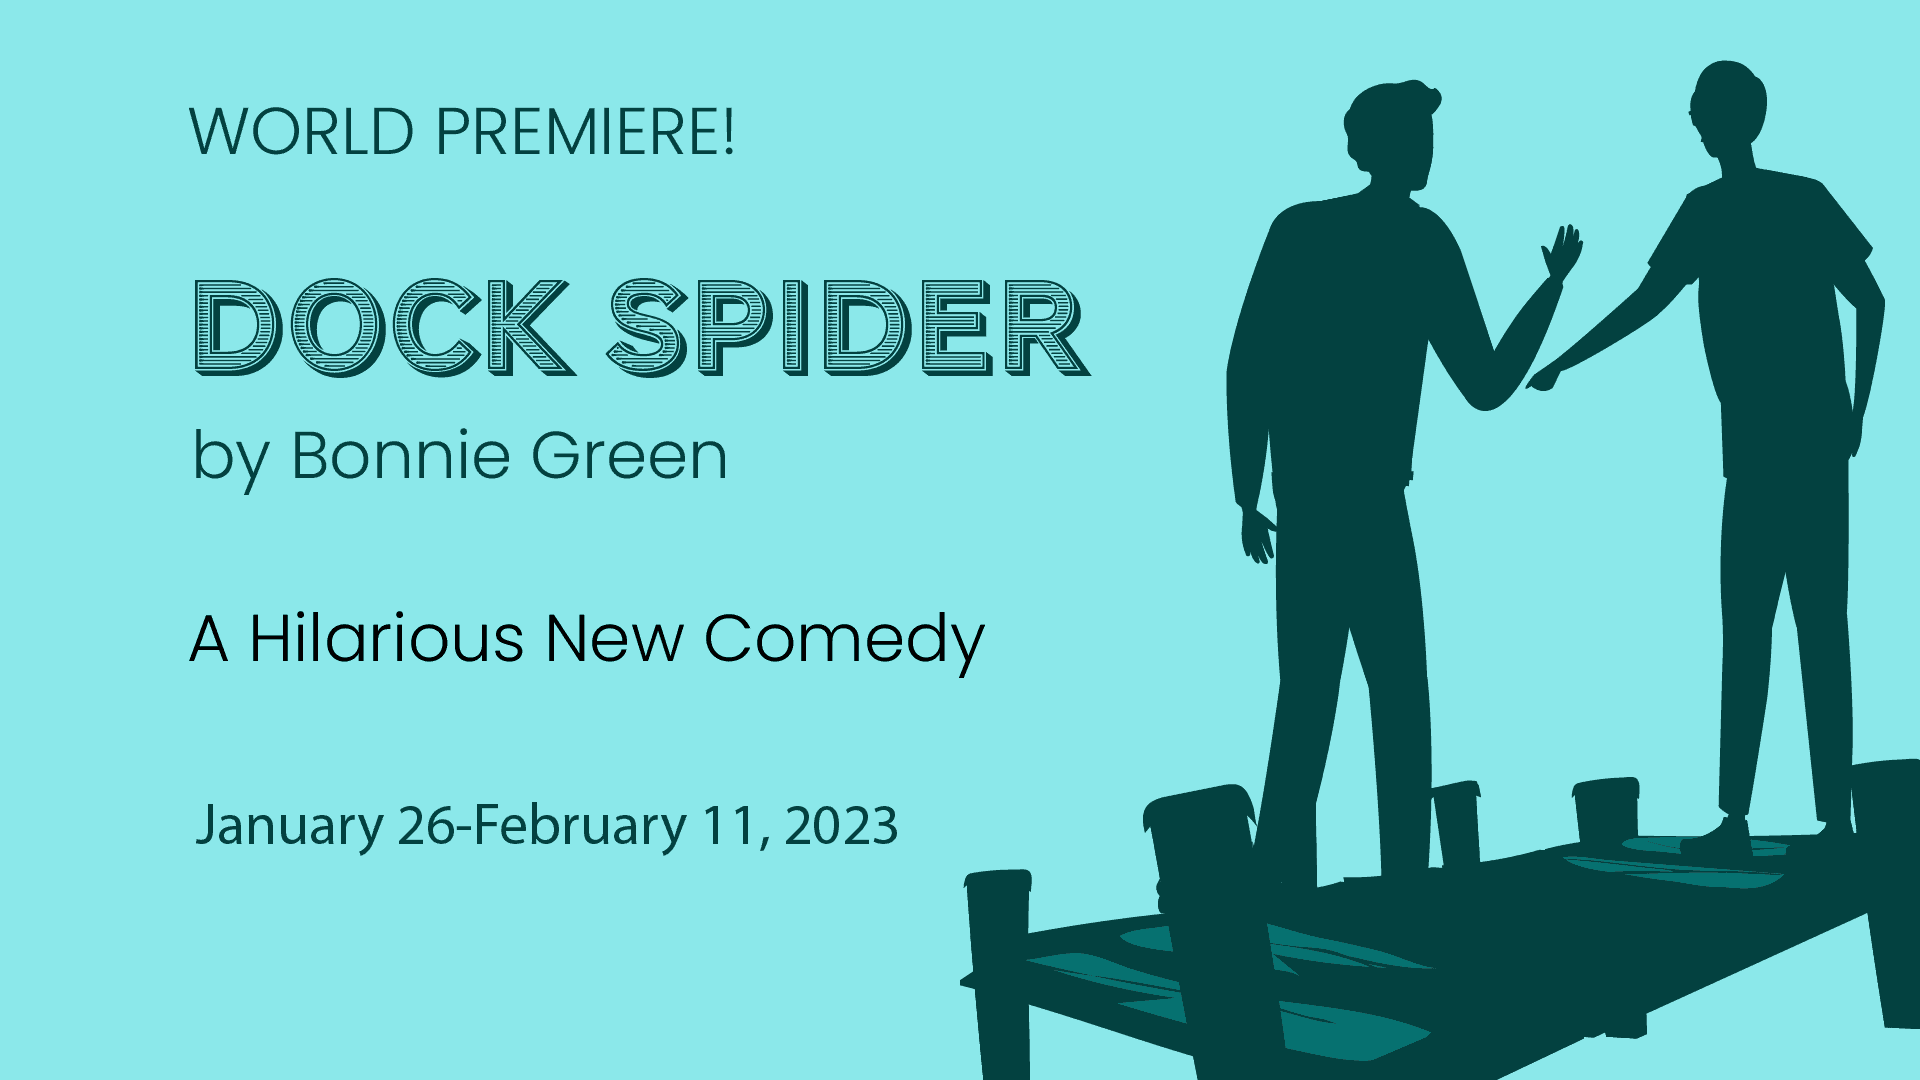 Next on the mainstage will be a comedy/thriller – DOCK SPIDER by Bonnie Green. Ken and Chuck find themselves alone on a dock, on an island, in a remote part of a large lake.  Chuck is a cagey, local lake guy with a chip truck and a rifle.  Ken is an urban, high-flying hedge-fund manager facing a life-changing deadline.  Why are they on this dock together, and why the smouldering mistrust?  The stakes for both are very, very high.  The carp would agree.  DOCK SPIDER kicks off the new year!